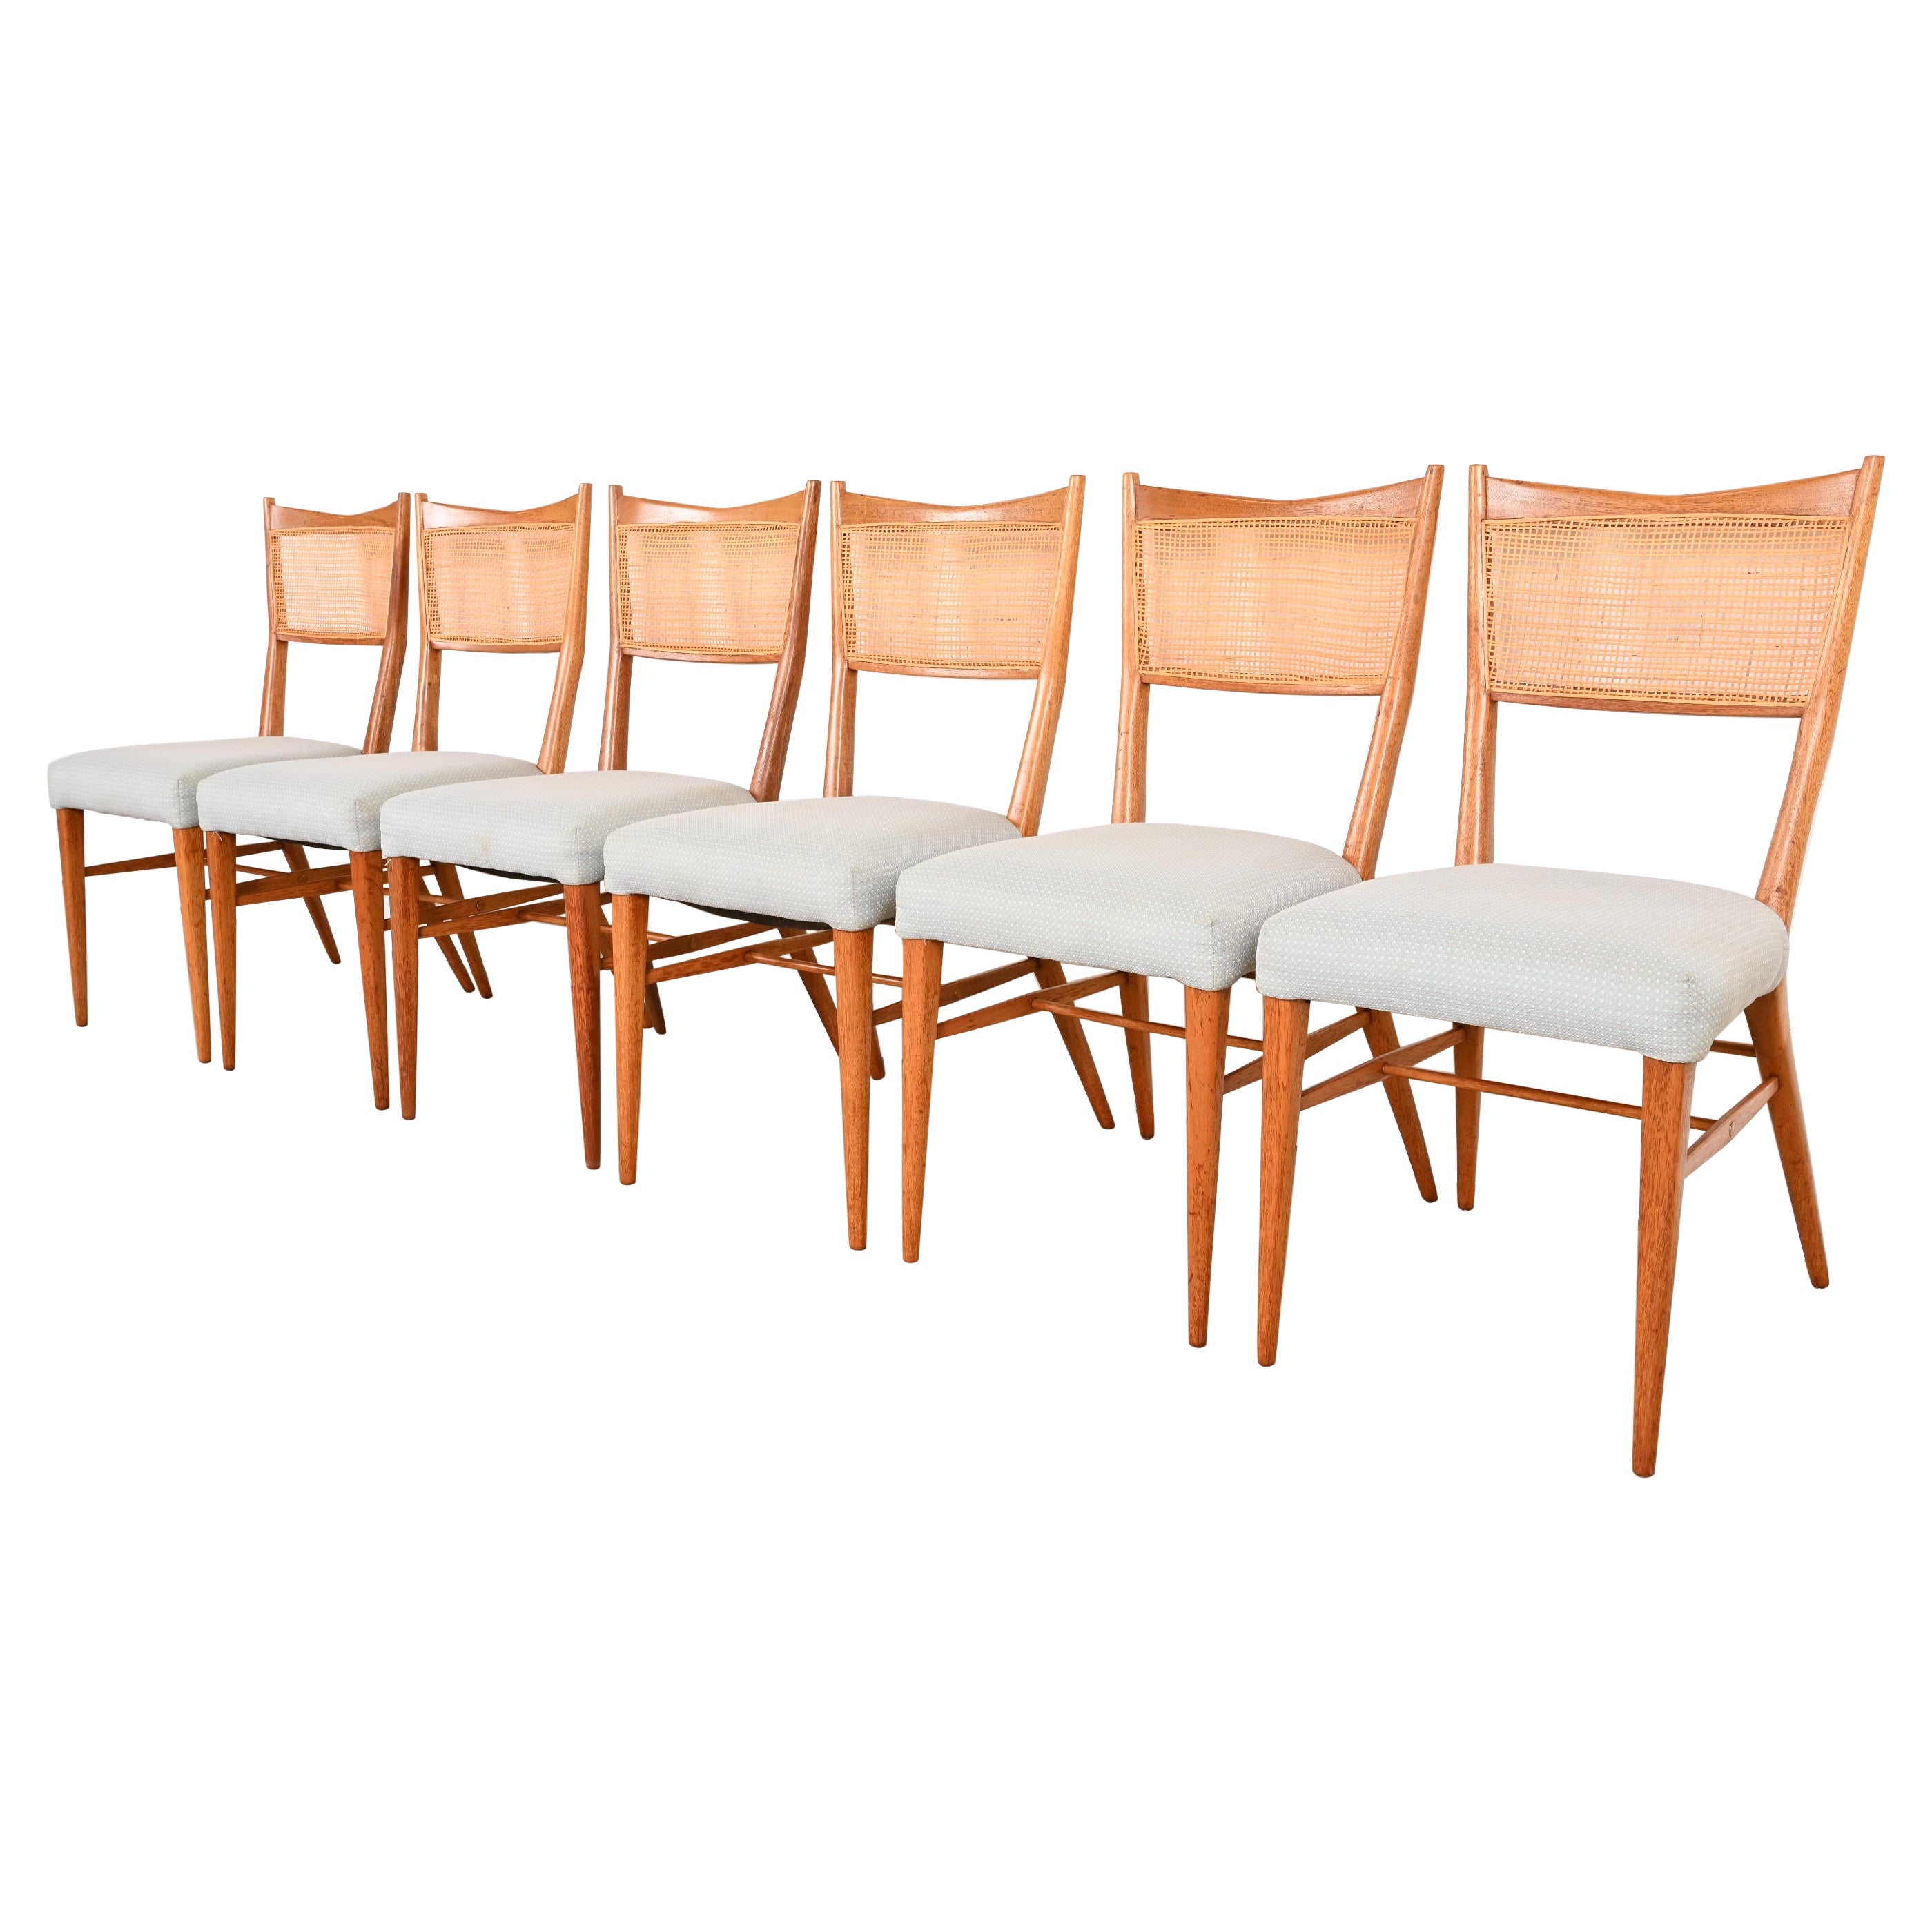 Paul McCobb for Directional Sculpted Mahogany and Cane Dining Chairs, Set of Six